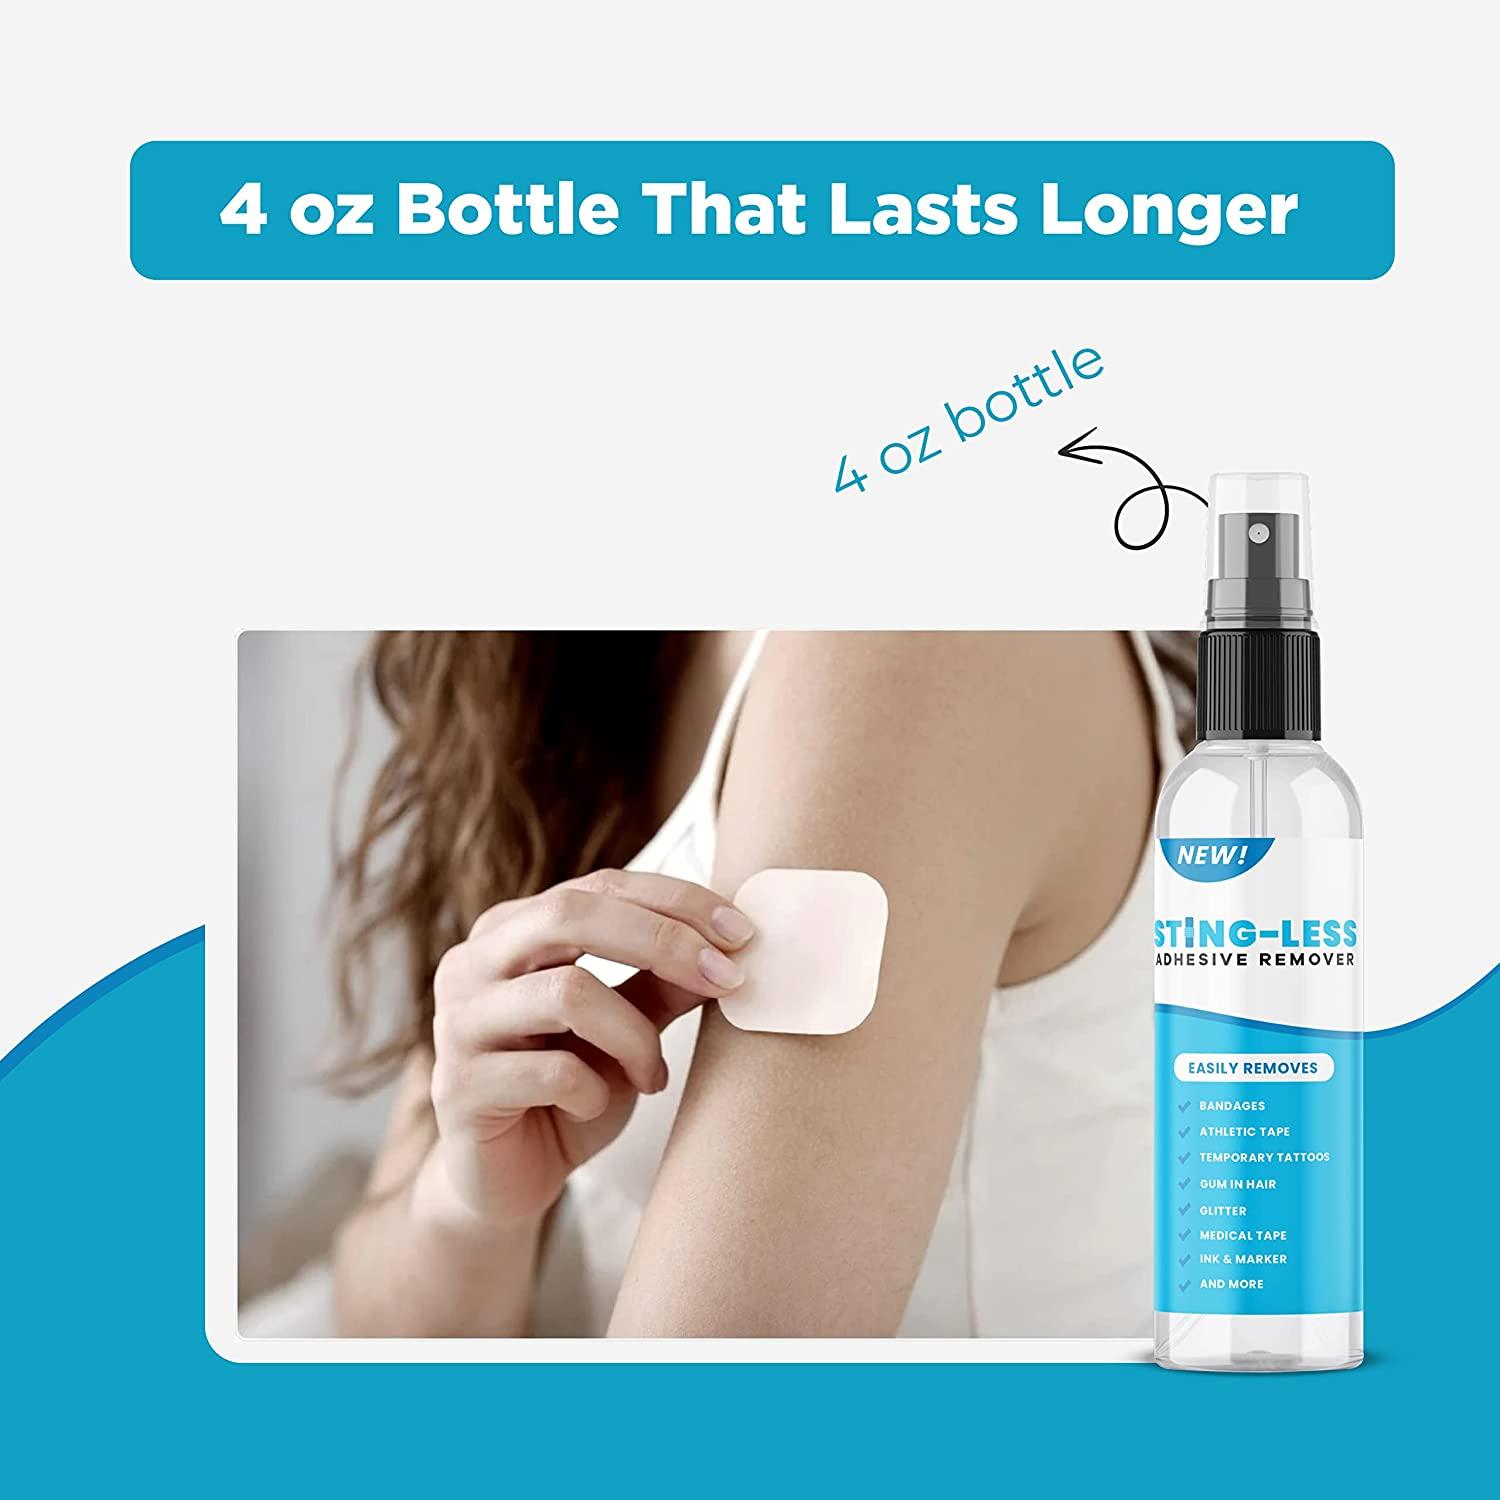 New Sting-Less Adhesive Remover for Skin